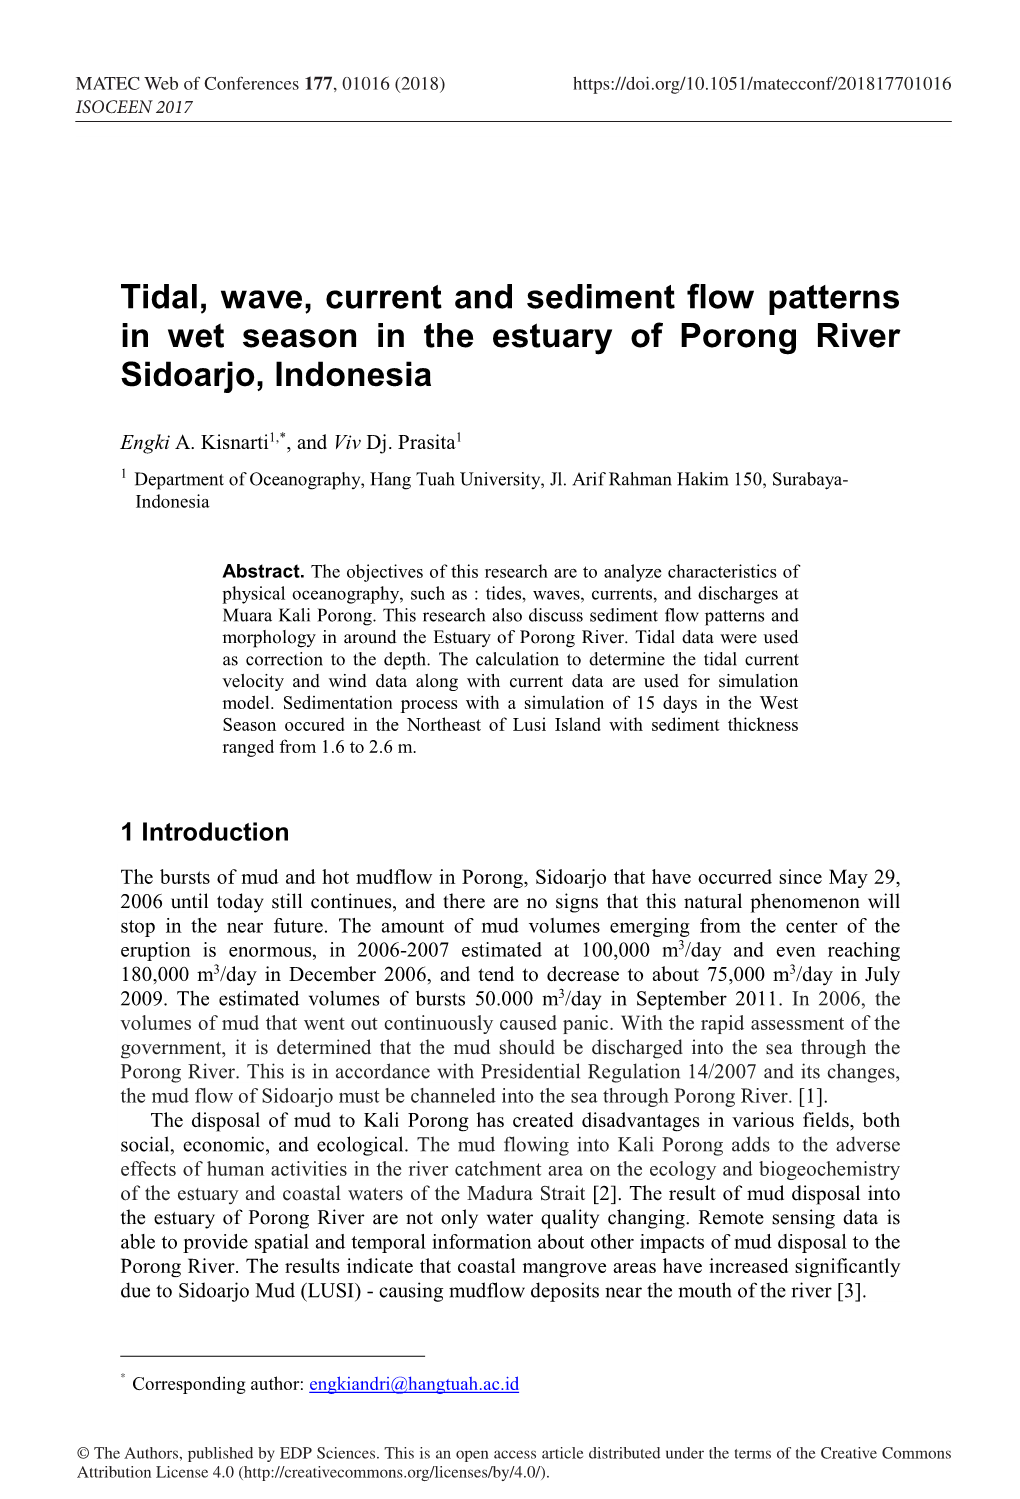 Tidal, Wave, Current and Sediment Flow Patterns in Wet Season in the Estuary of Porong River Sidoarjo, Indonesia